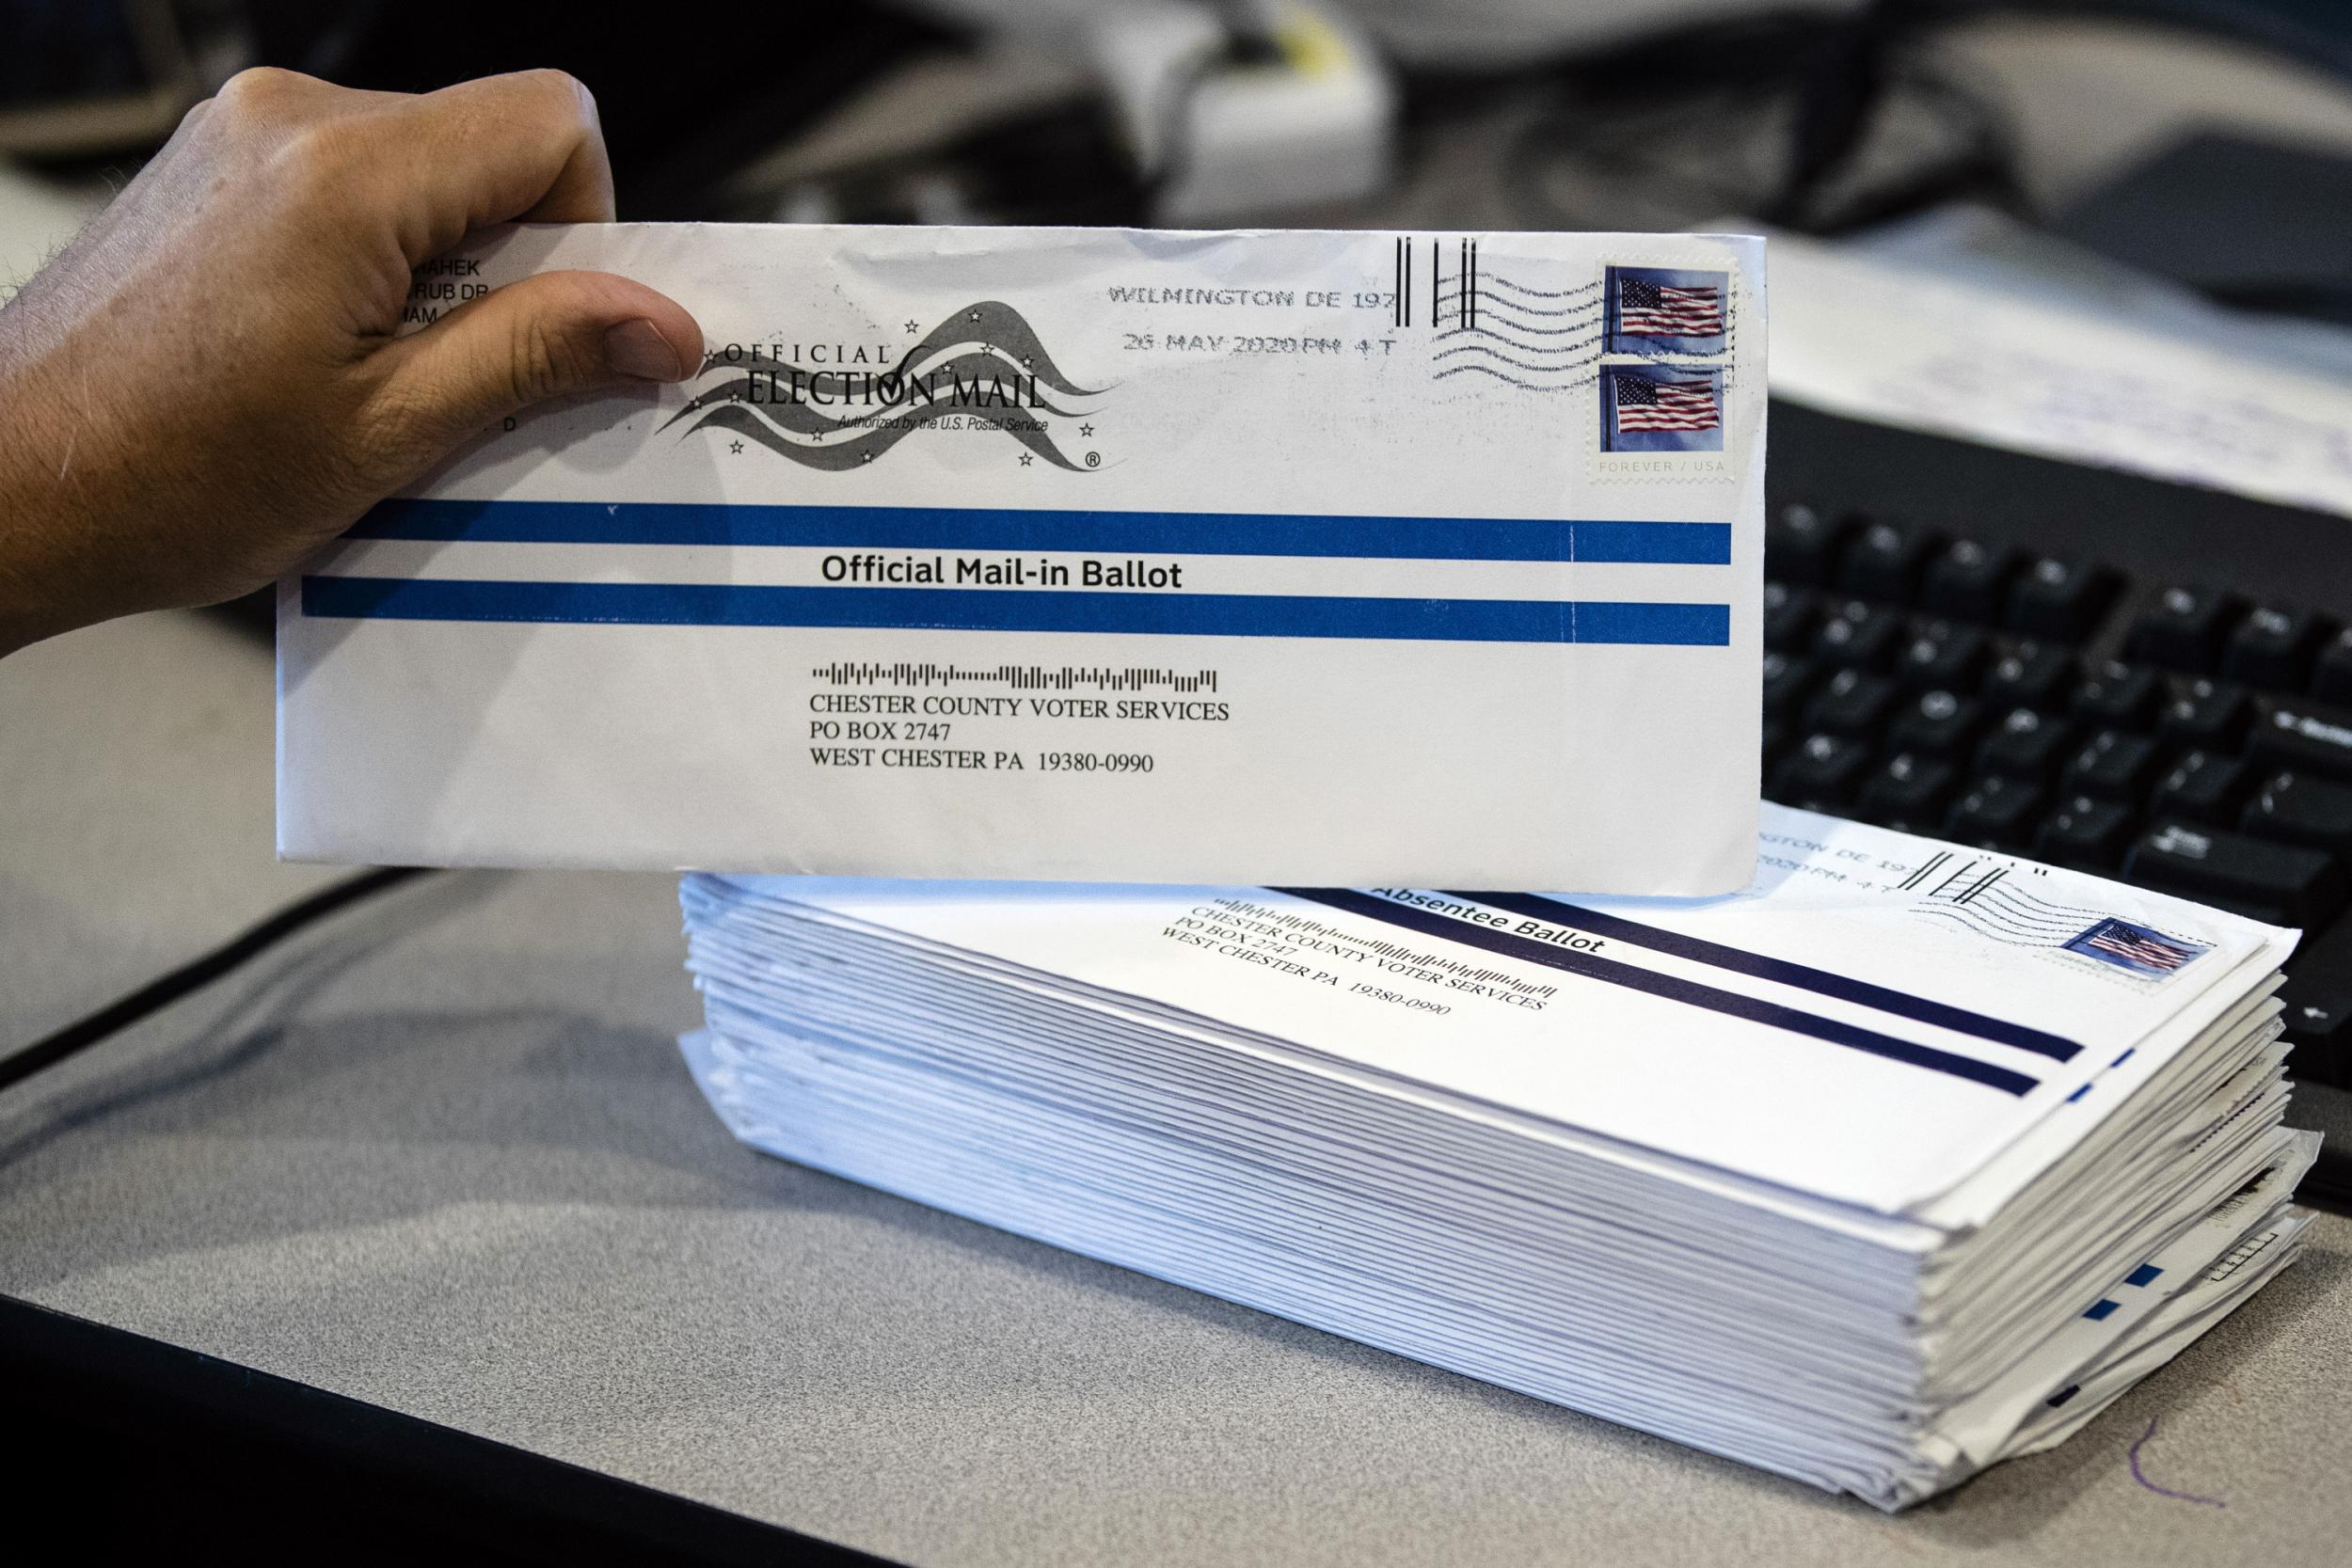 In the midst of a battle over mail-in ballots, the Trump campaign is seeking even more restrictions on their use in Pennsylvania, writes Richard Hall&nbsp;